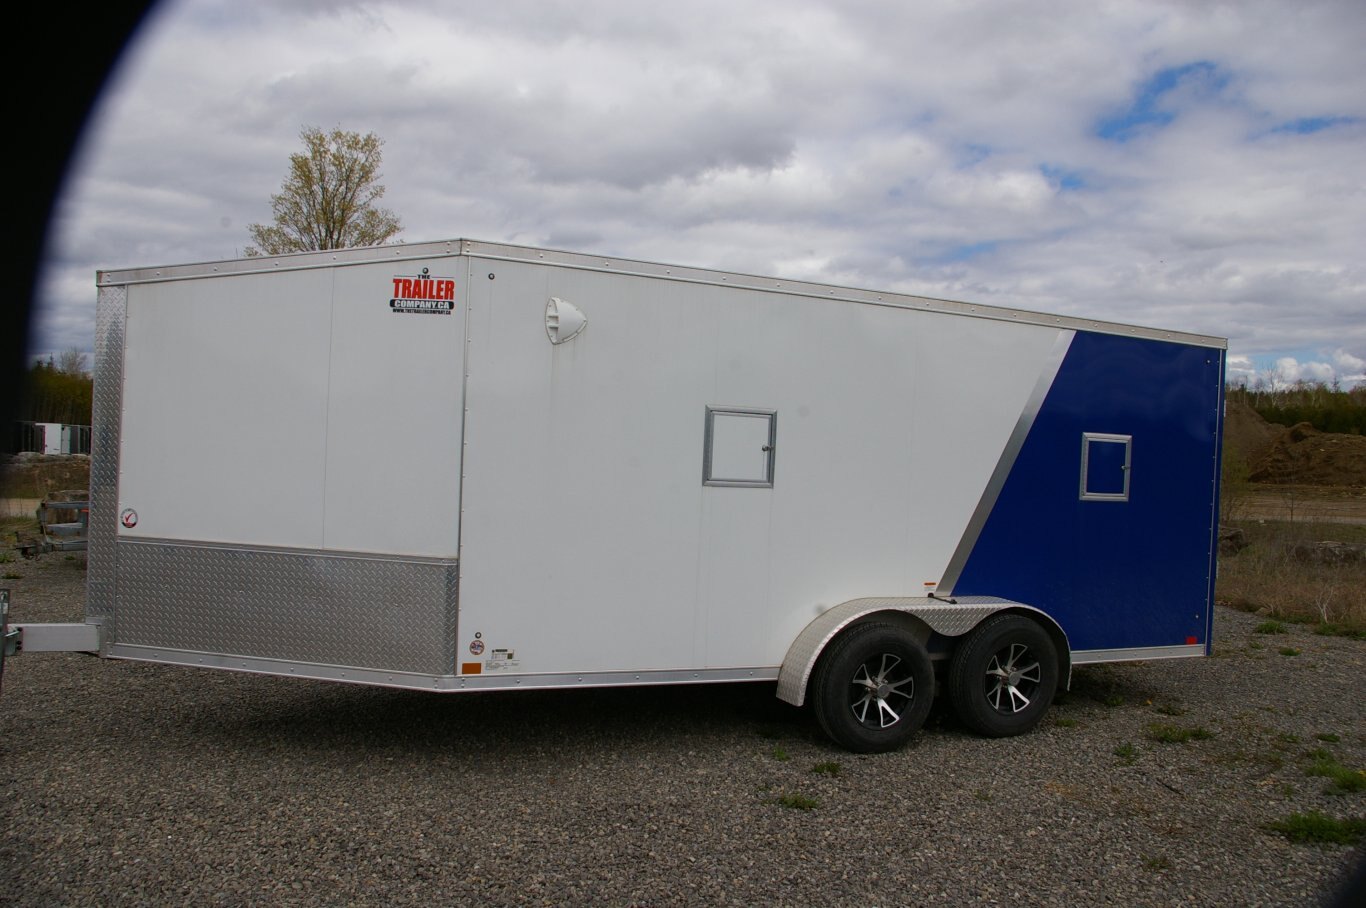 2022 USED 7X21 SNOWMOBILE TRAILER, TANDEM AXLE, 4 Sled Trailer Drive in and Drive Out, WHITE/BLUE, 7000GVWR